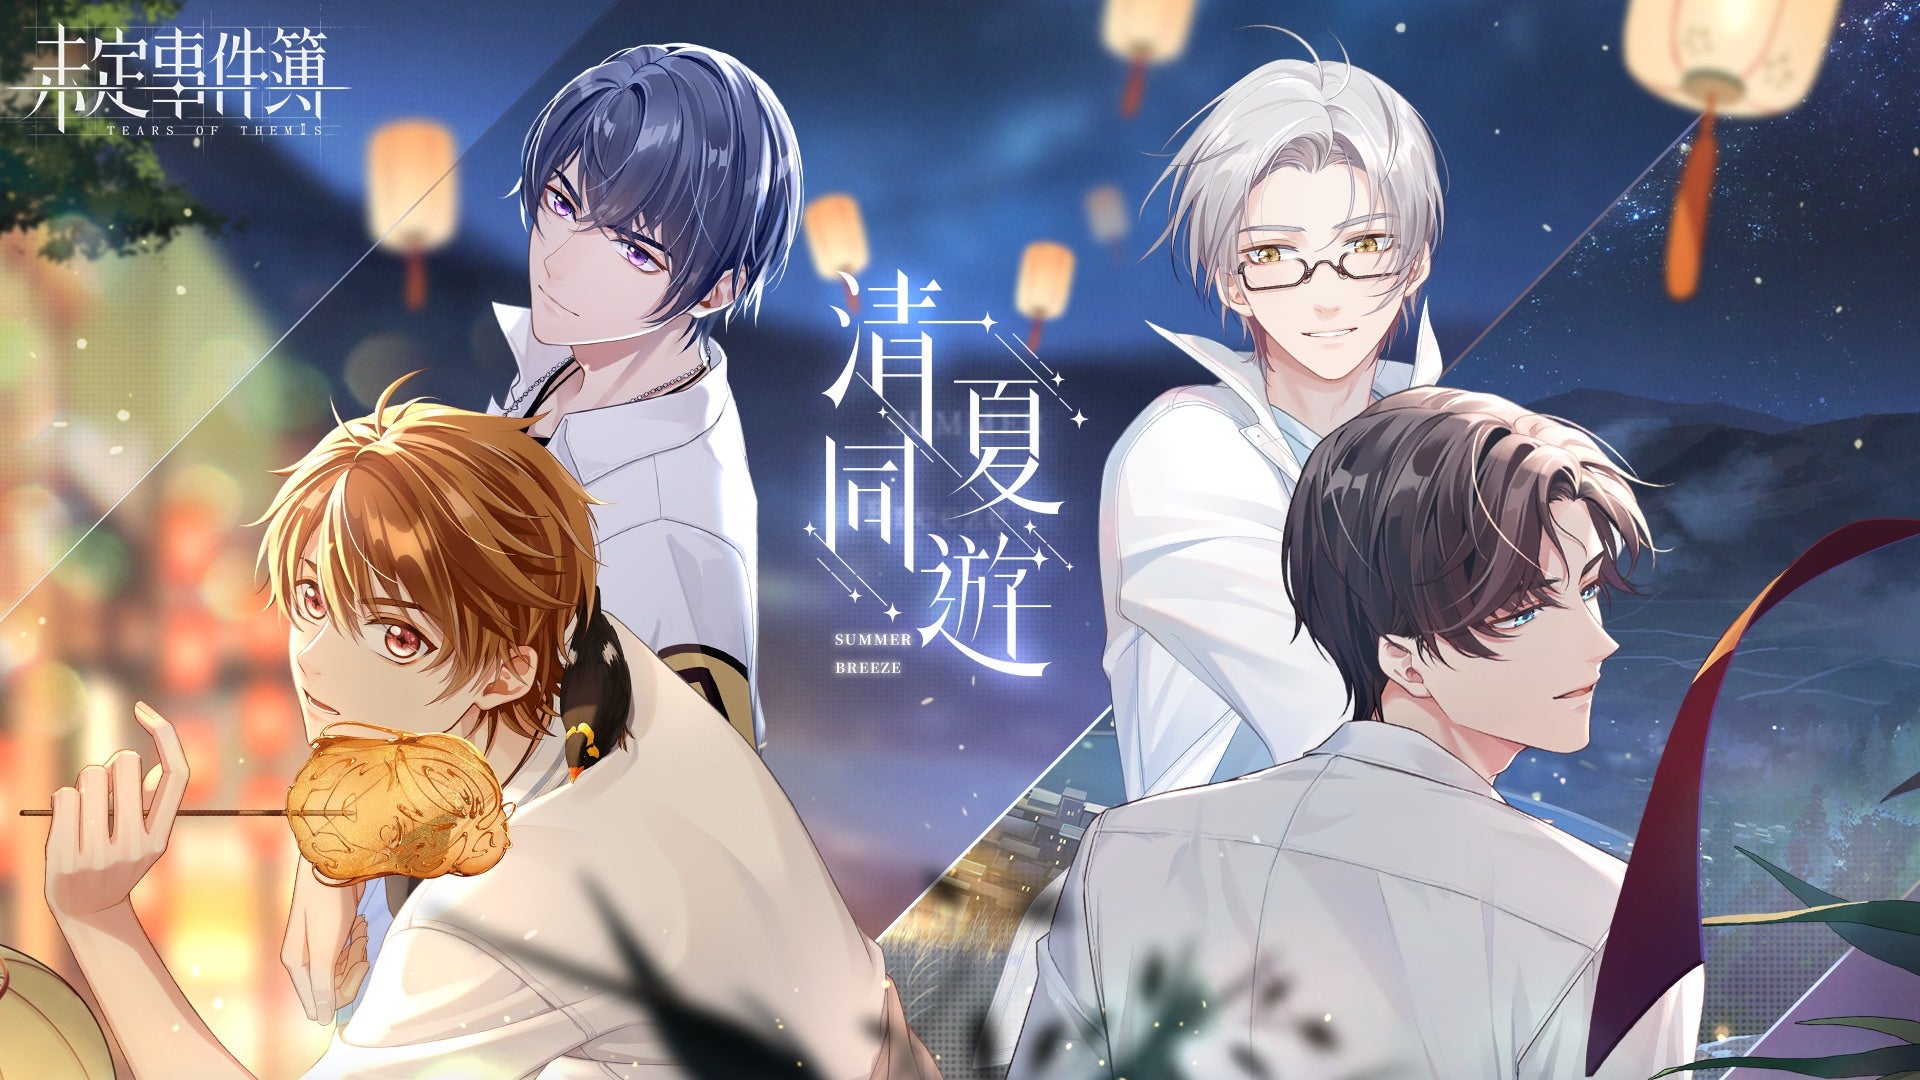 Genshin Impact Developers miHoYo Reveal Closed Beta For Their Detective Romance Game Tears of Themis Stomp Magazine